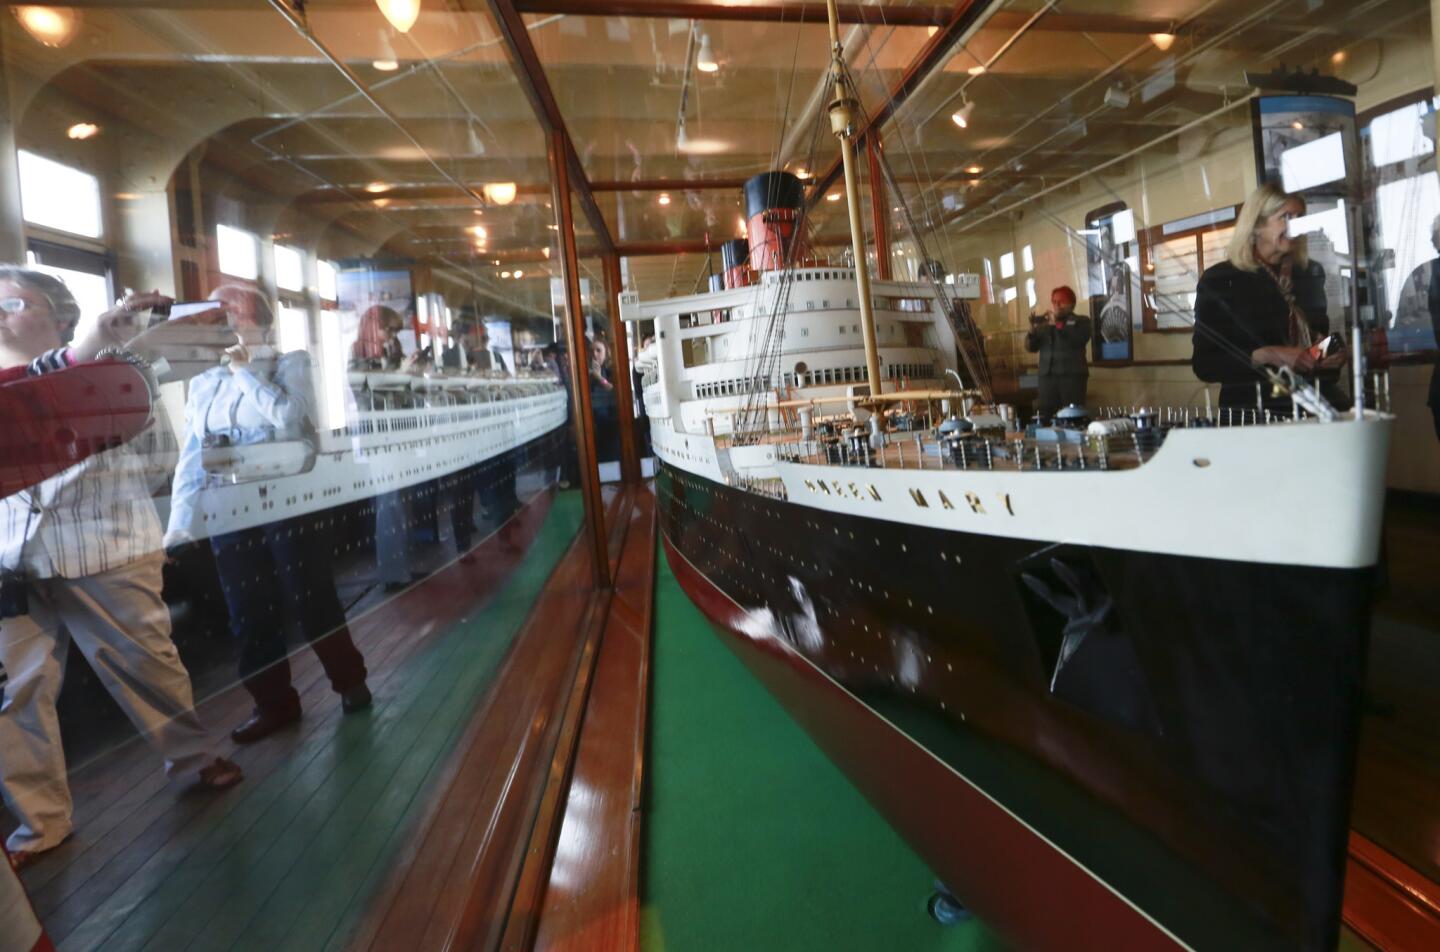 The Queen Mary offered free admission and a day of events, including the dedication of a ship model exhibit, to celebrate the first time her much younger sister ship, the Queen Elizabeth has made a port stop in Long Beach.